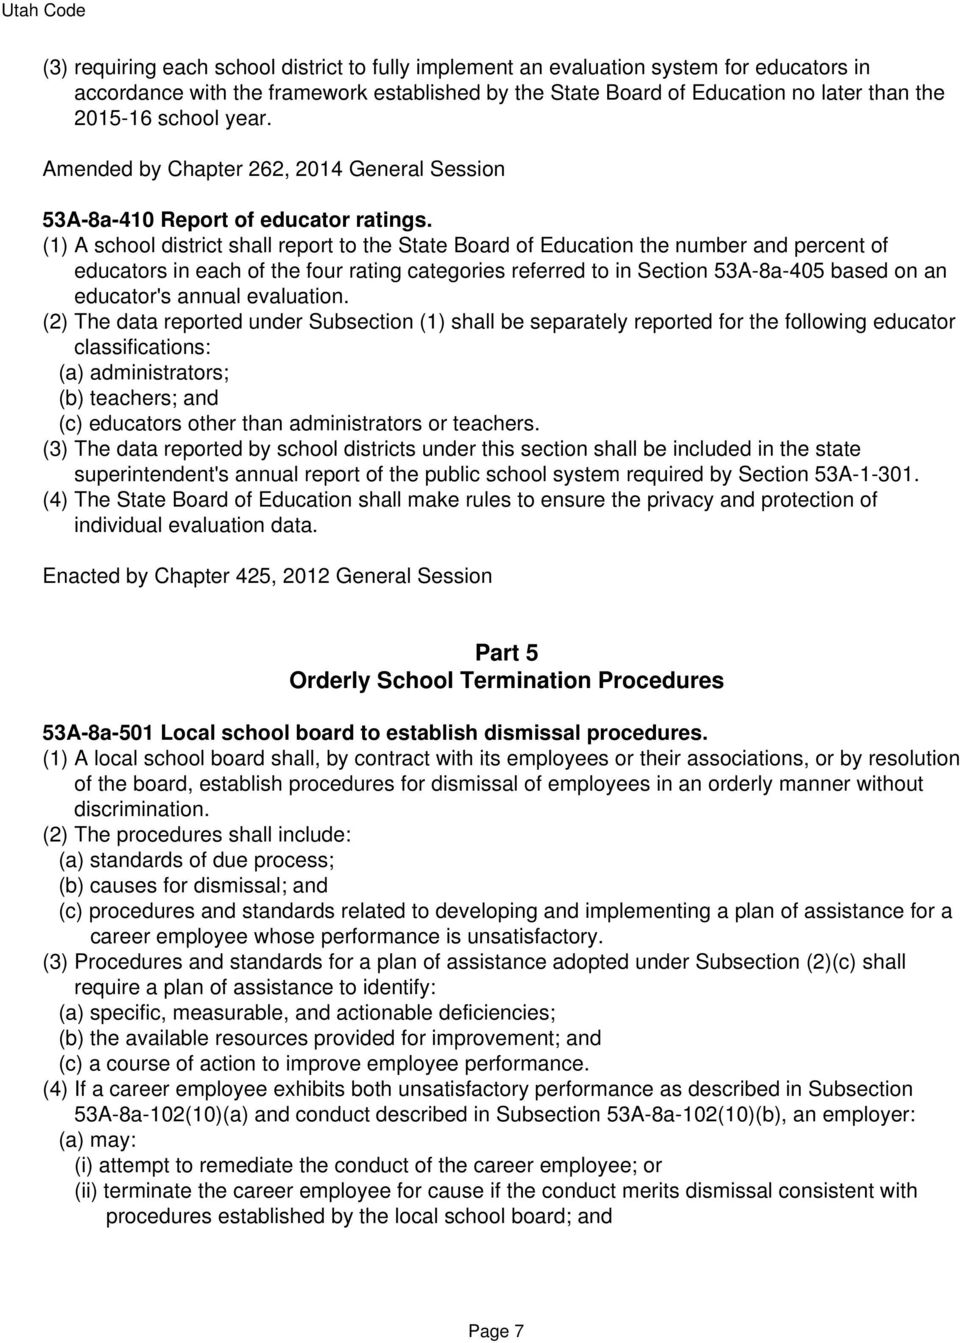 (1) A school district shall report to the State Board of Education the number and percent of educators in each of the four rating categories referred to in Section 53A-8a-405 based on an educator's